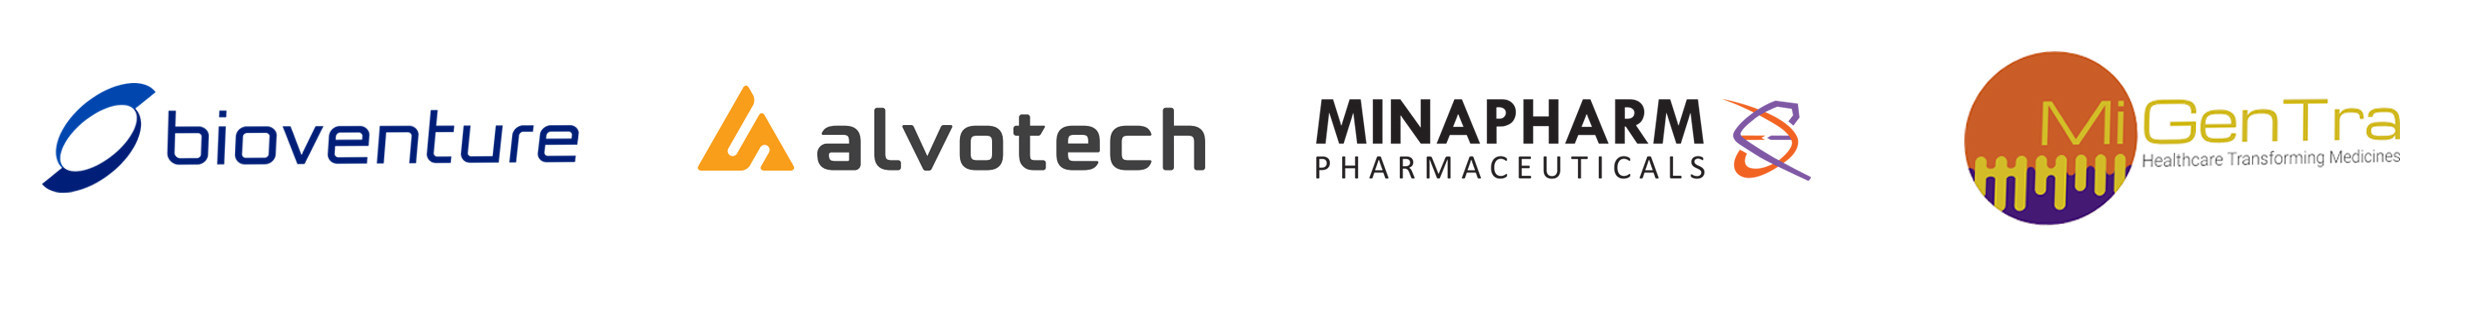 Bioventure, Minapharm Pharmaceuticals and MiGenTra Sign an Exclusive Agreement for the Commercialization of Multiple Biosimilar Candidates of Alvotech in the Middle East and Africa